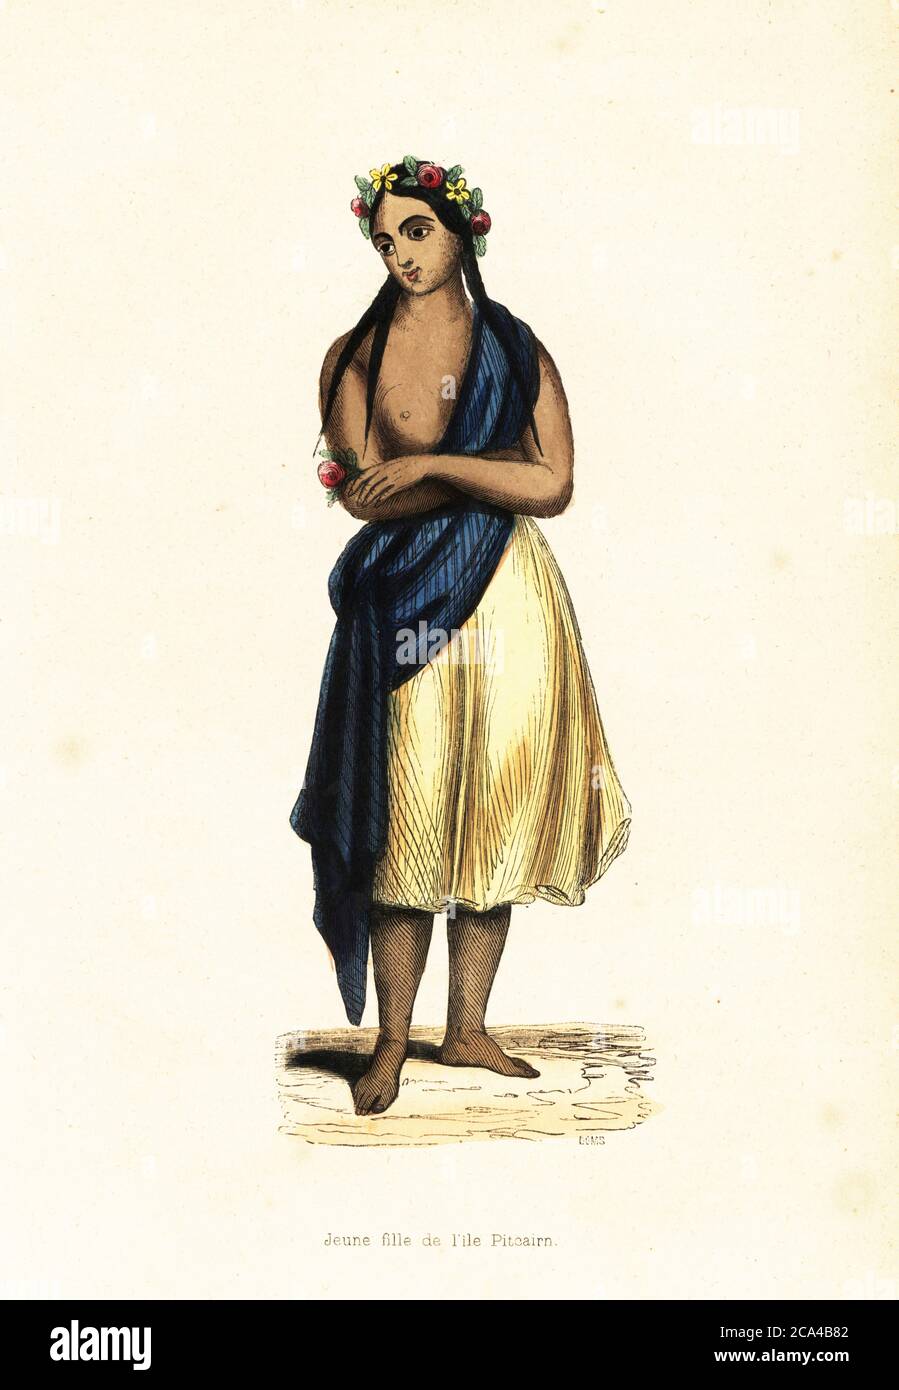 Tahitian girl of Pitcairn Island, South Pacific Ocean. One of the Tahitiian  women brought by the English mutineers of HMS Bounty. She wears a blue  shawl, yellow skirt and a garland of